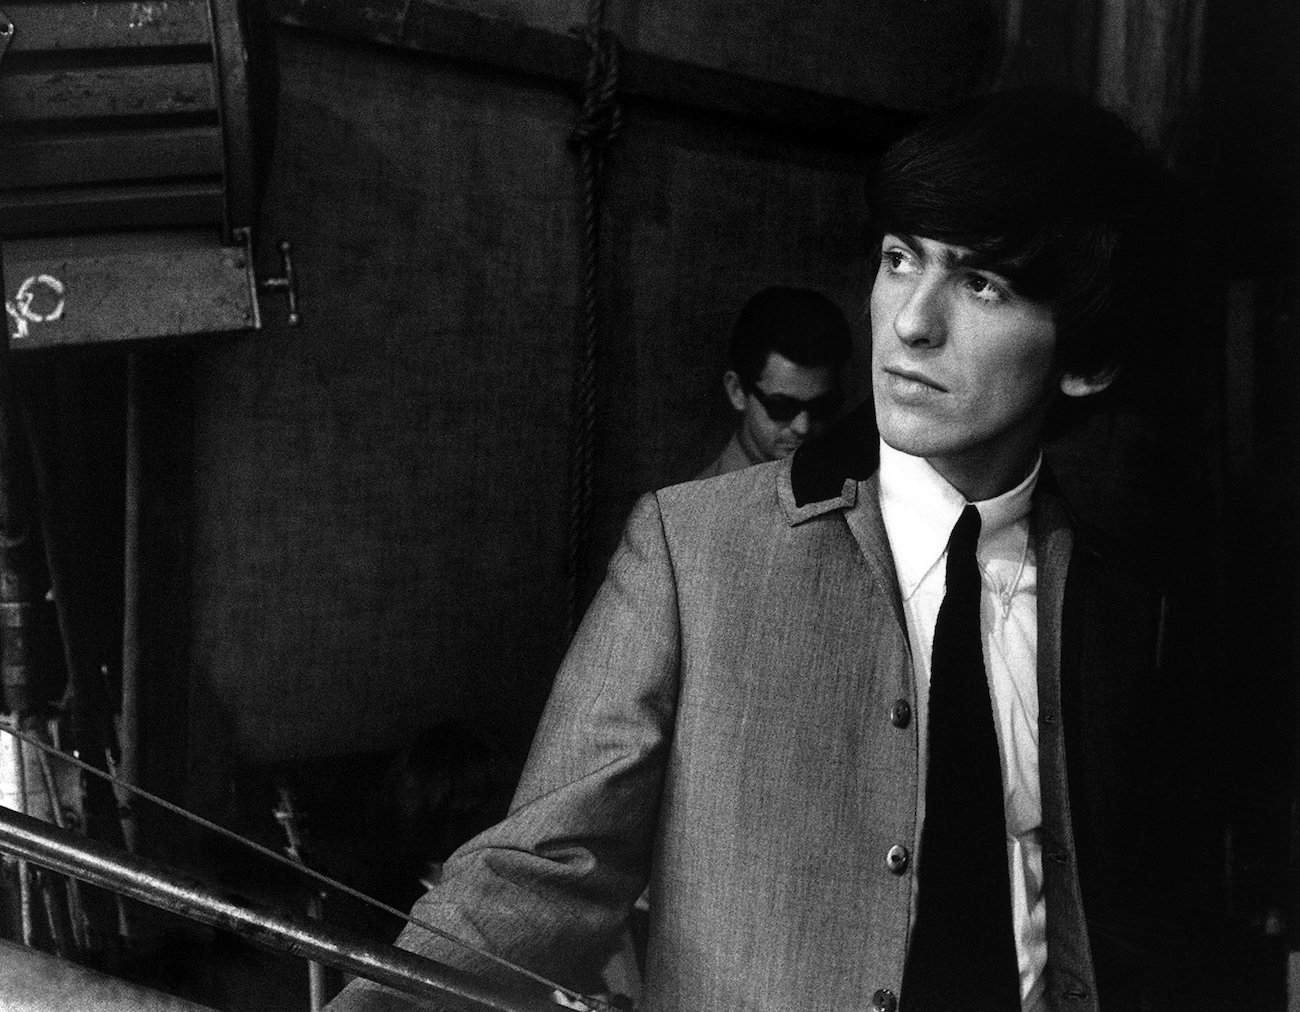 George Harrison on the set of 'A Hard Day's Night' in 1964.